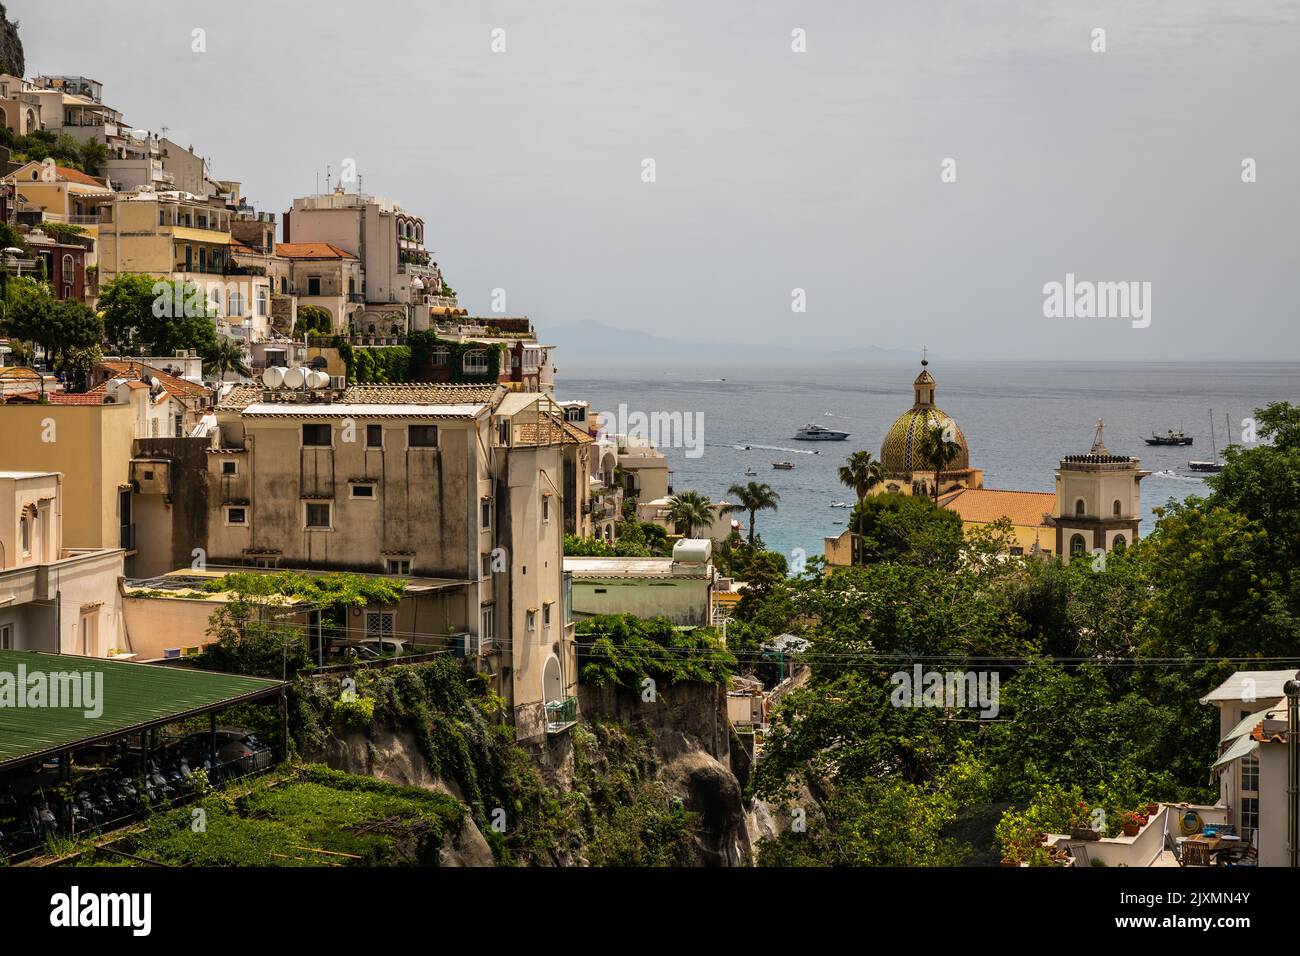 The beautiful and rural cliff side town of Positano on the Amalfi Coast of Italy, Europe. Stock Photo